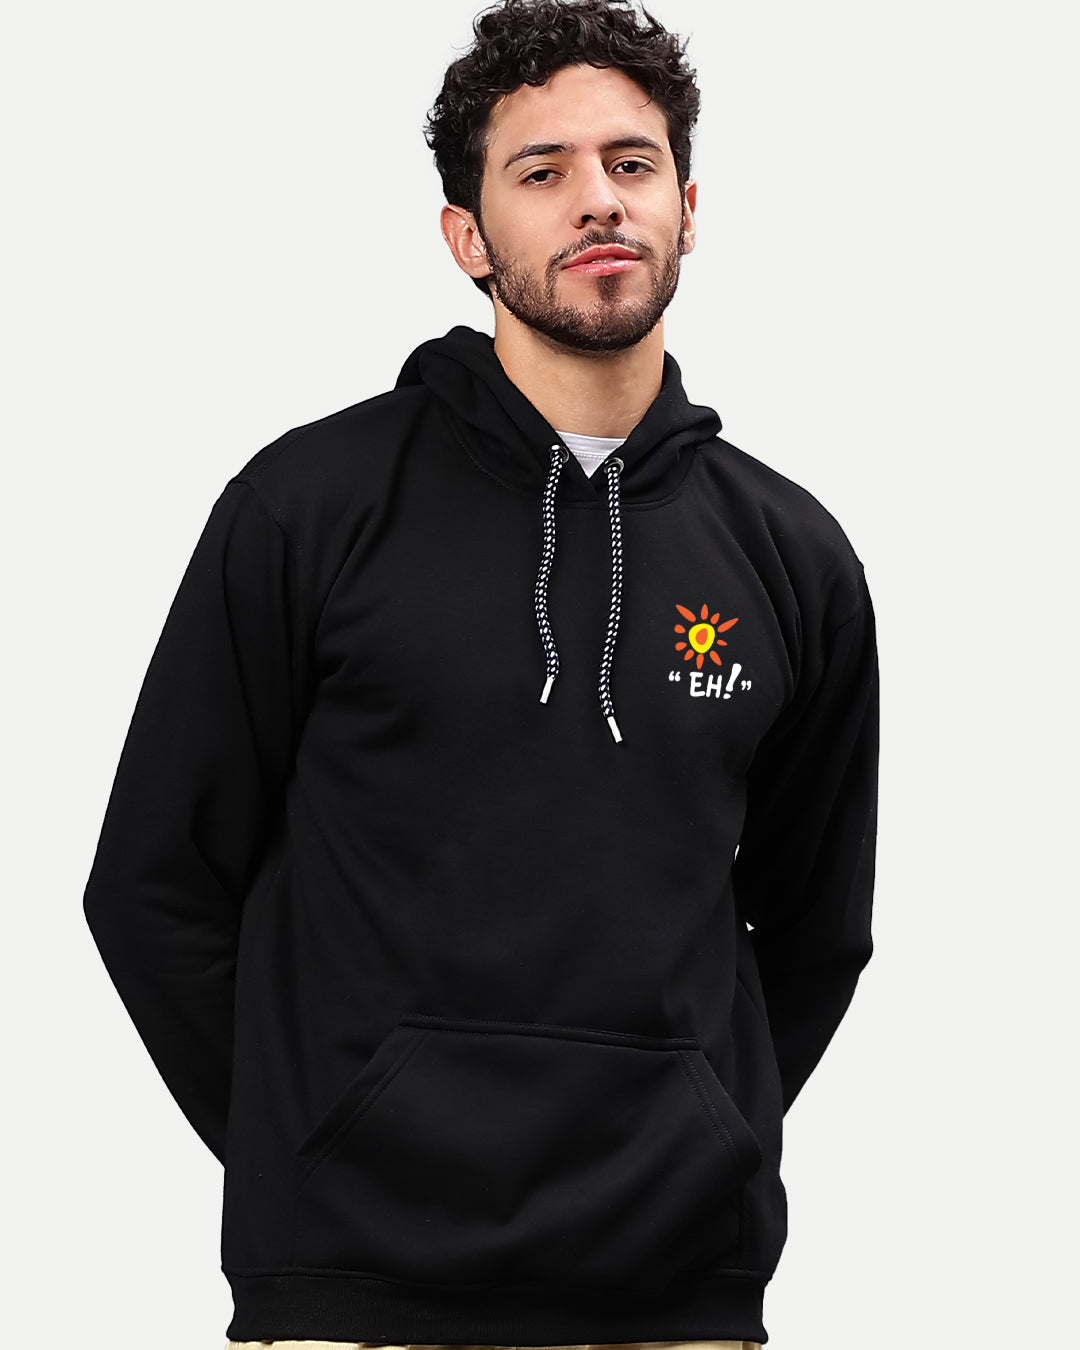 Earth Without Art Men's Hoodie